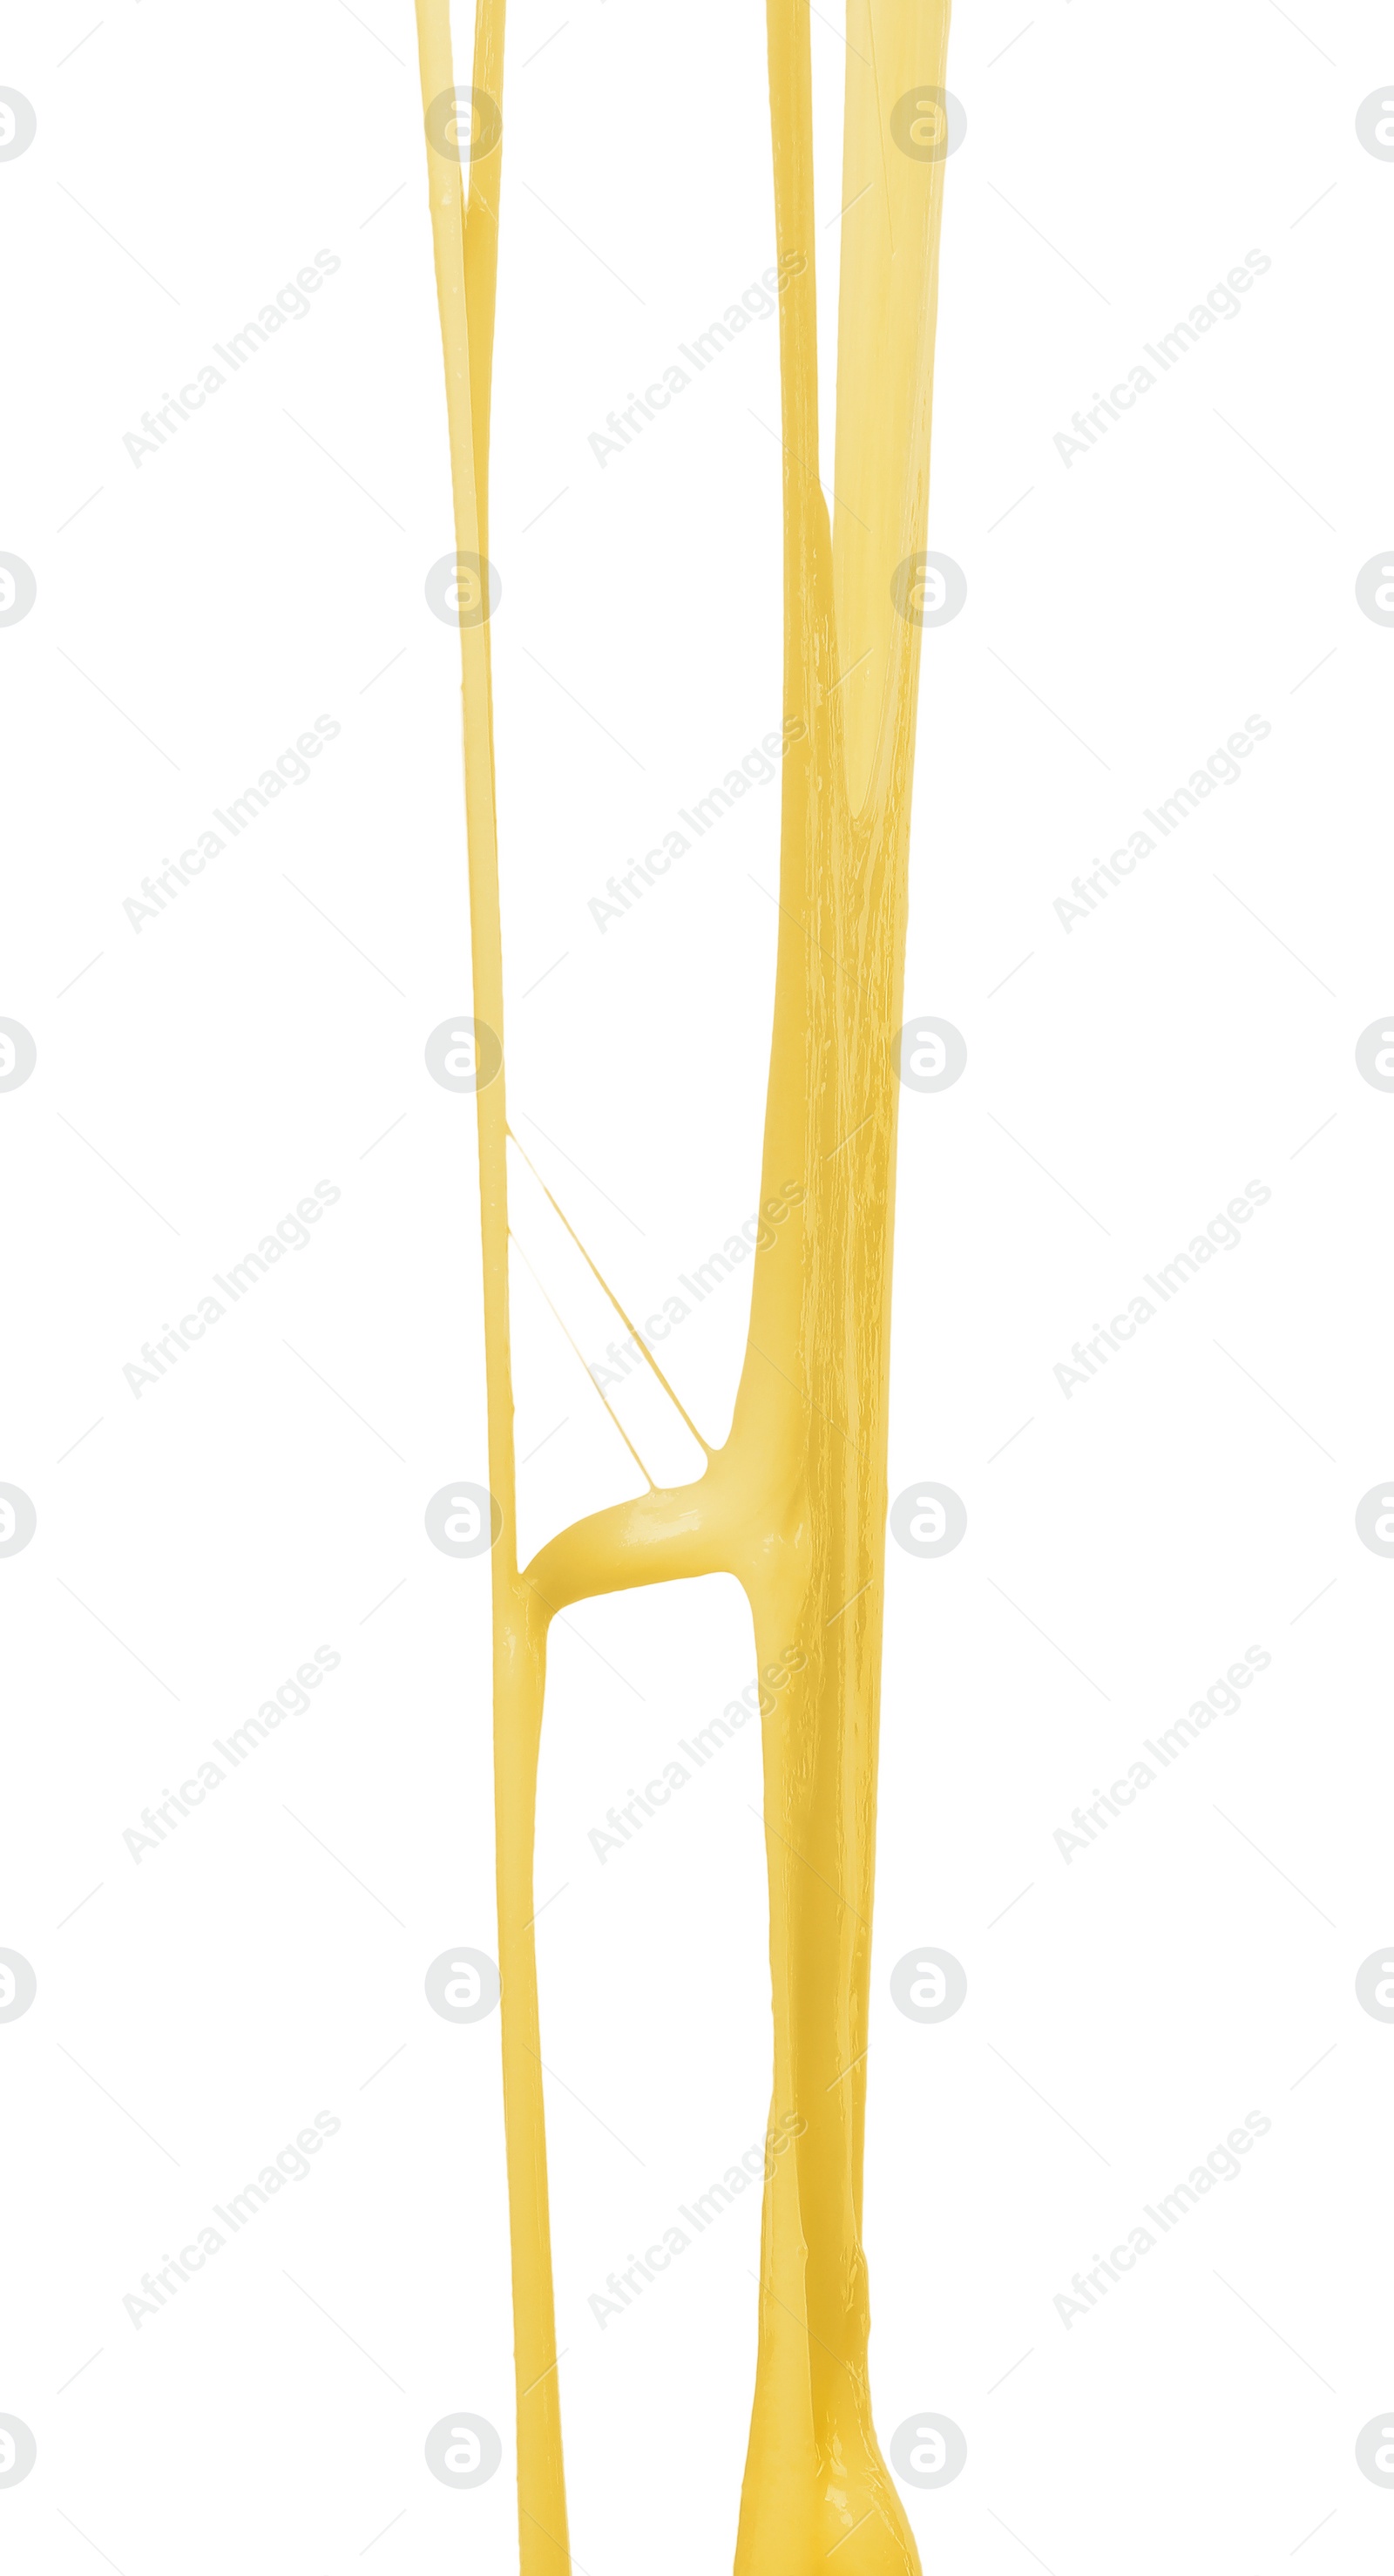 Photo of Stretching delicious melted cheese isolated on white